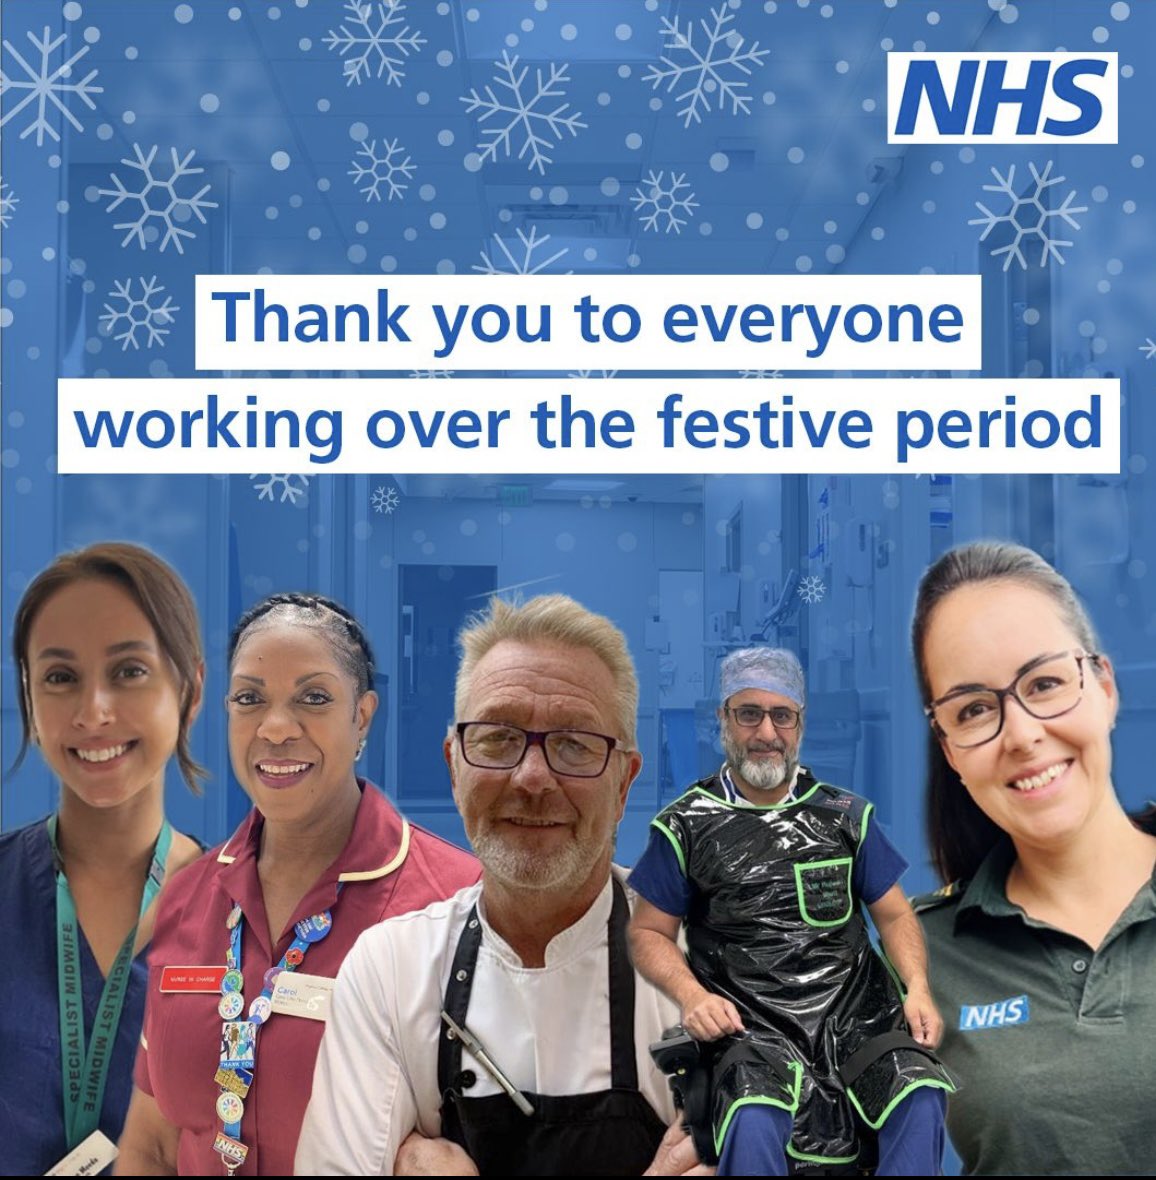 Merry Christmas 🎄🎉 Thank you to all working today to keep our people safe and well. Much appreciated 👍🏼@CWPT_NHS